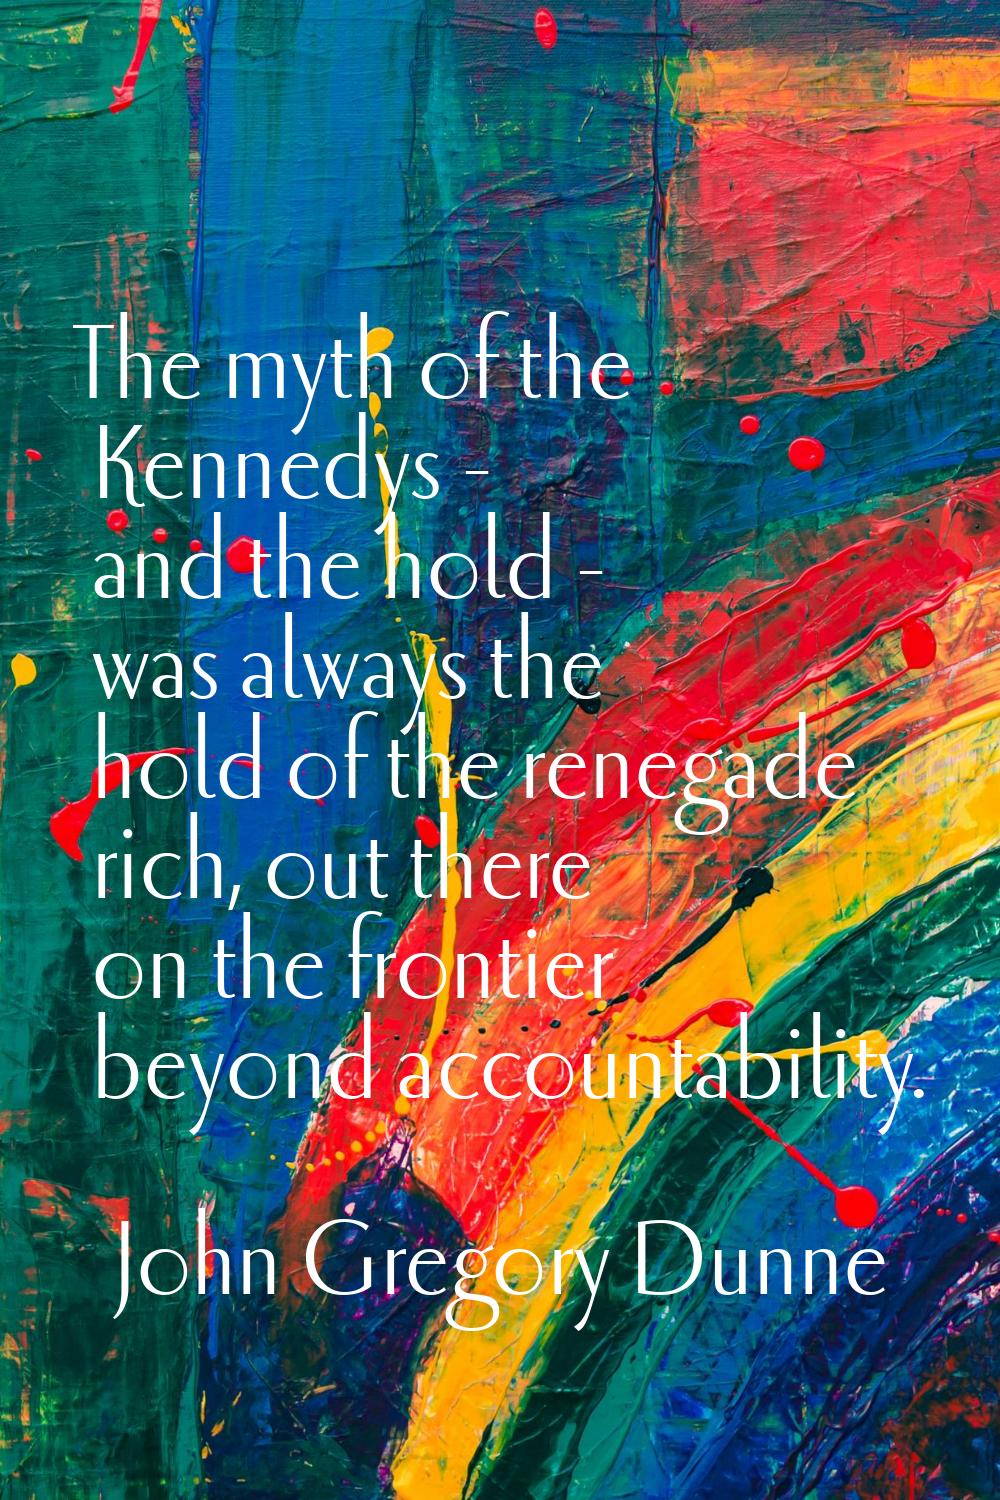 The myth of the Kennedys - and the hold - was always the hold of the renegade rich, out there on th